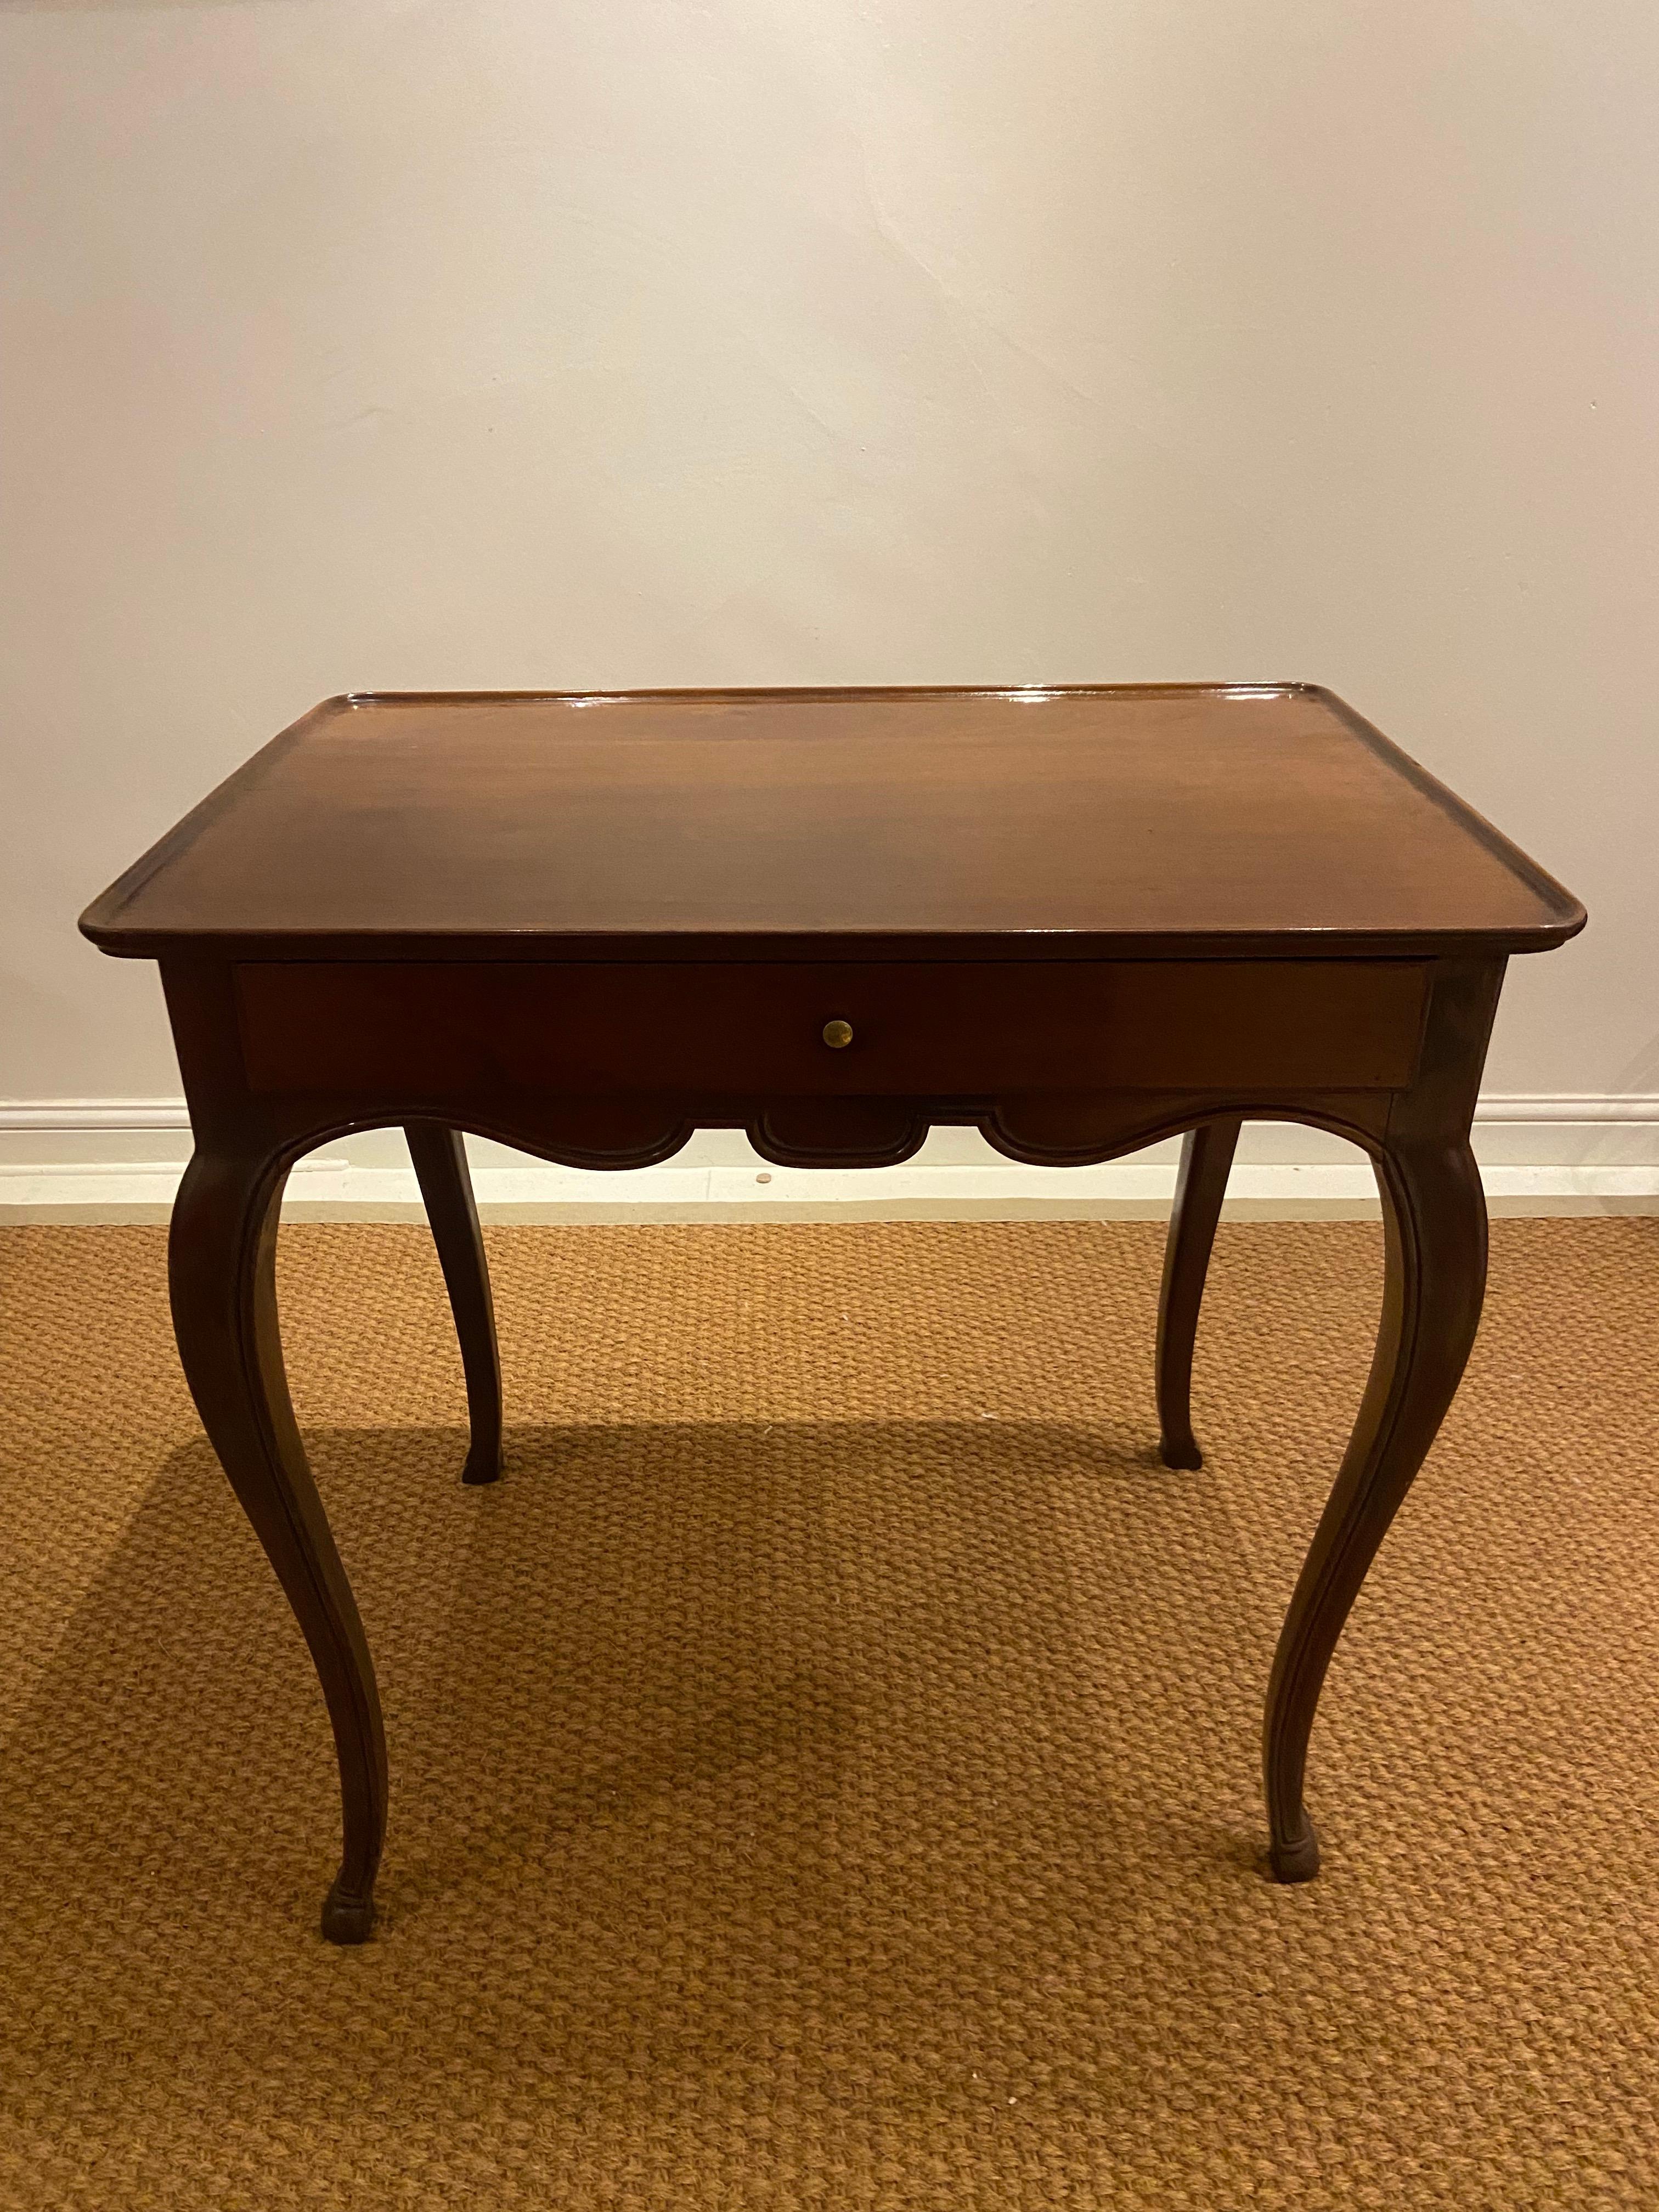 A French Provincial mahogany table (mid-18th century). With hoof feet.